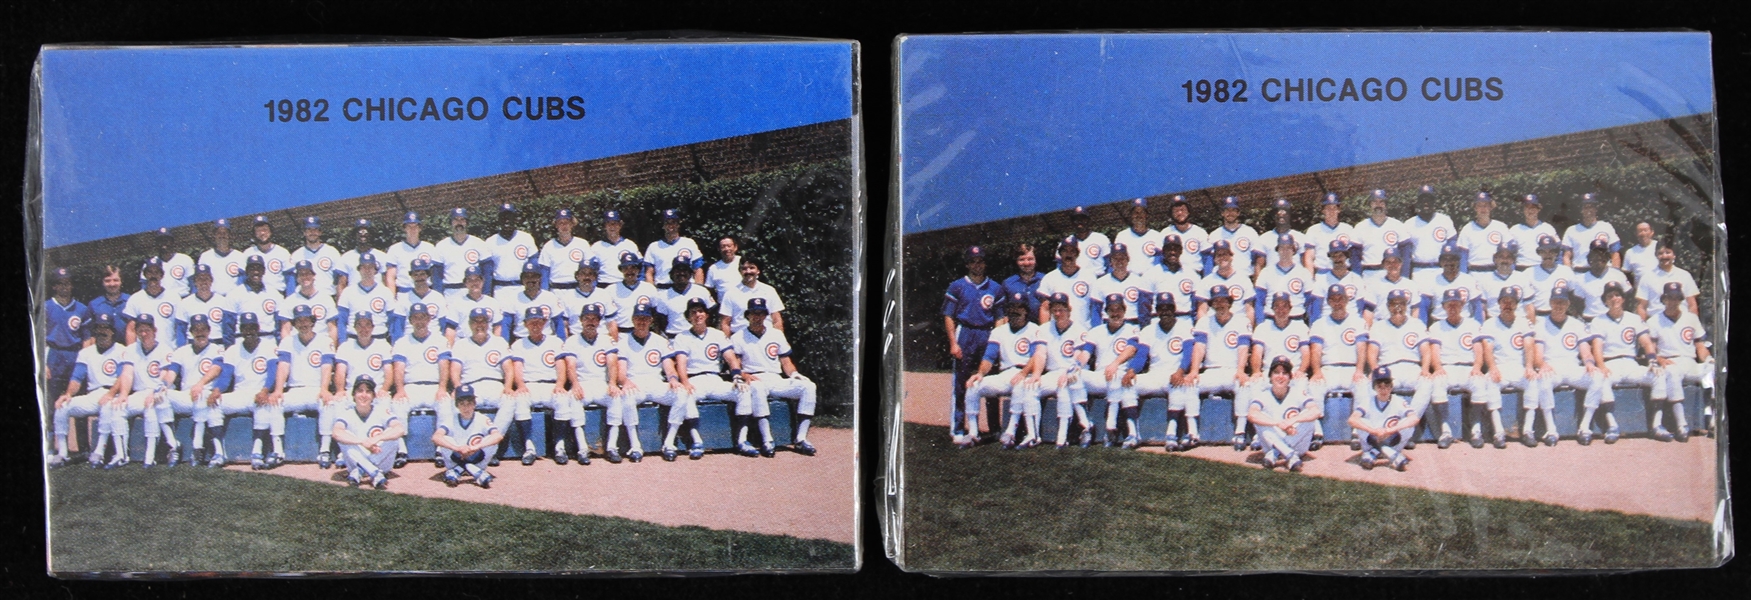 1982 Chicago Cubs Red Lobster Sealed Baseball Trading Card Team Set - Lot of 2